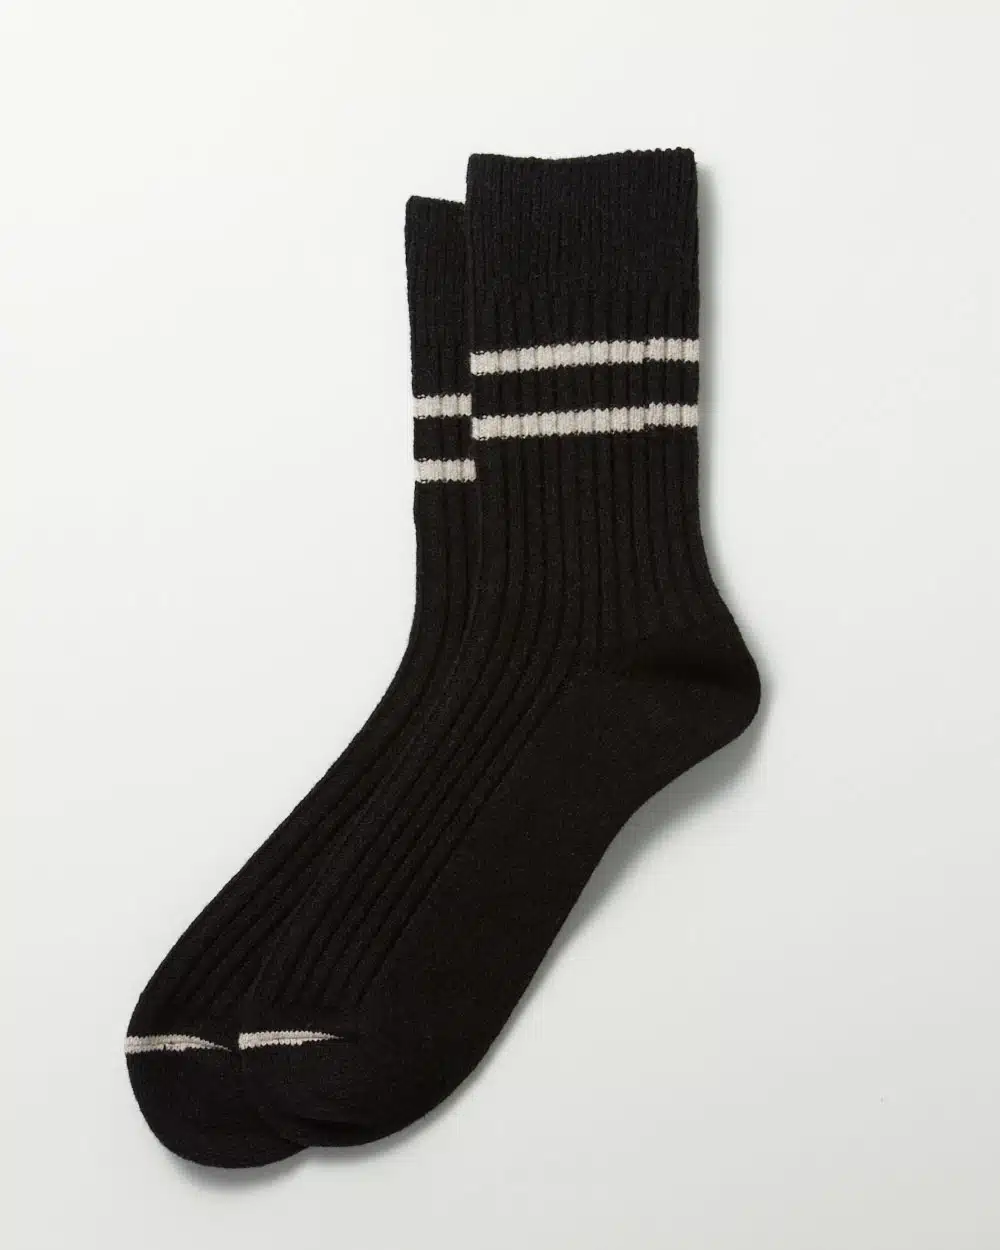 Recycled Cotton Wool Daily 3 Pack Socks - Black/Gray